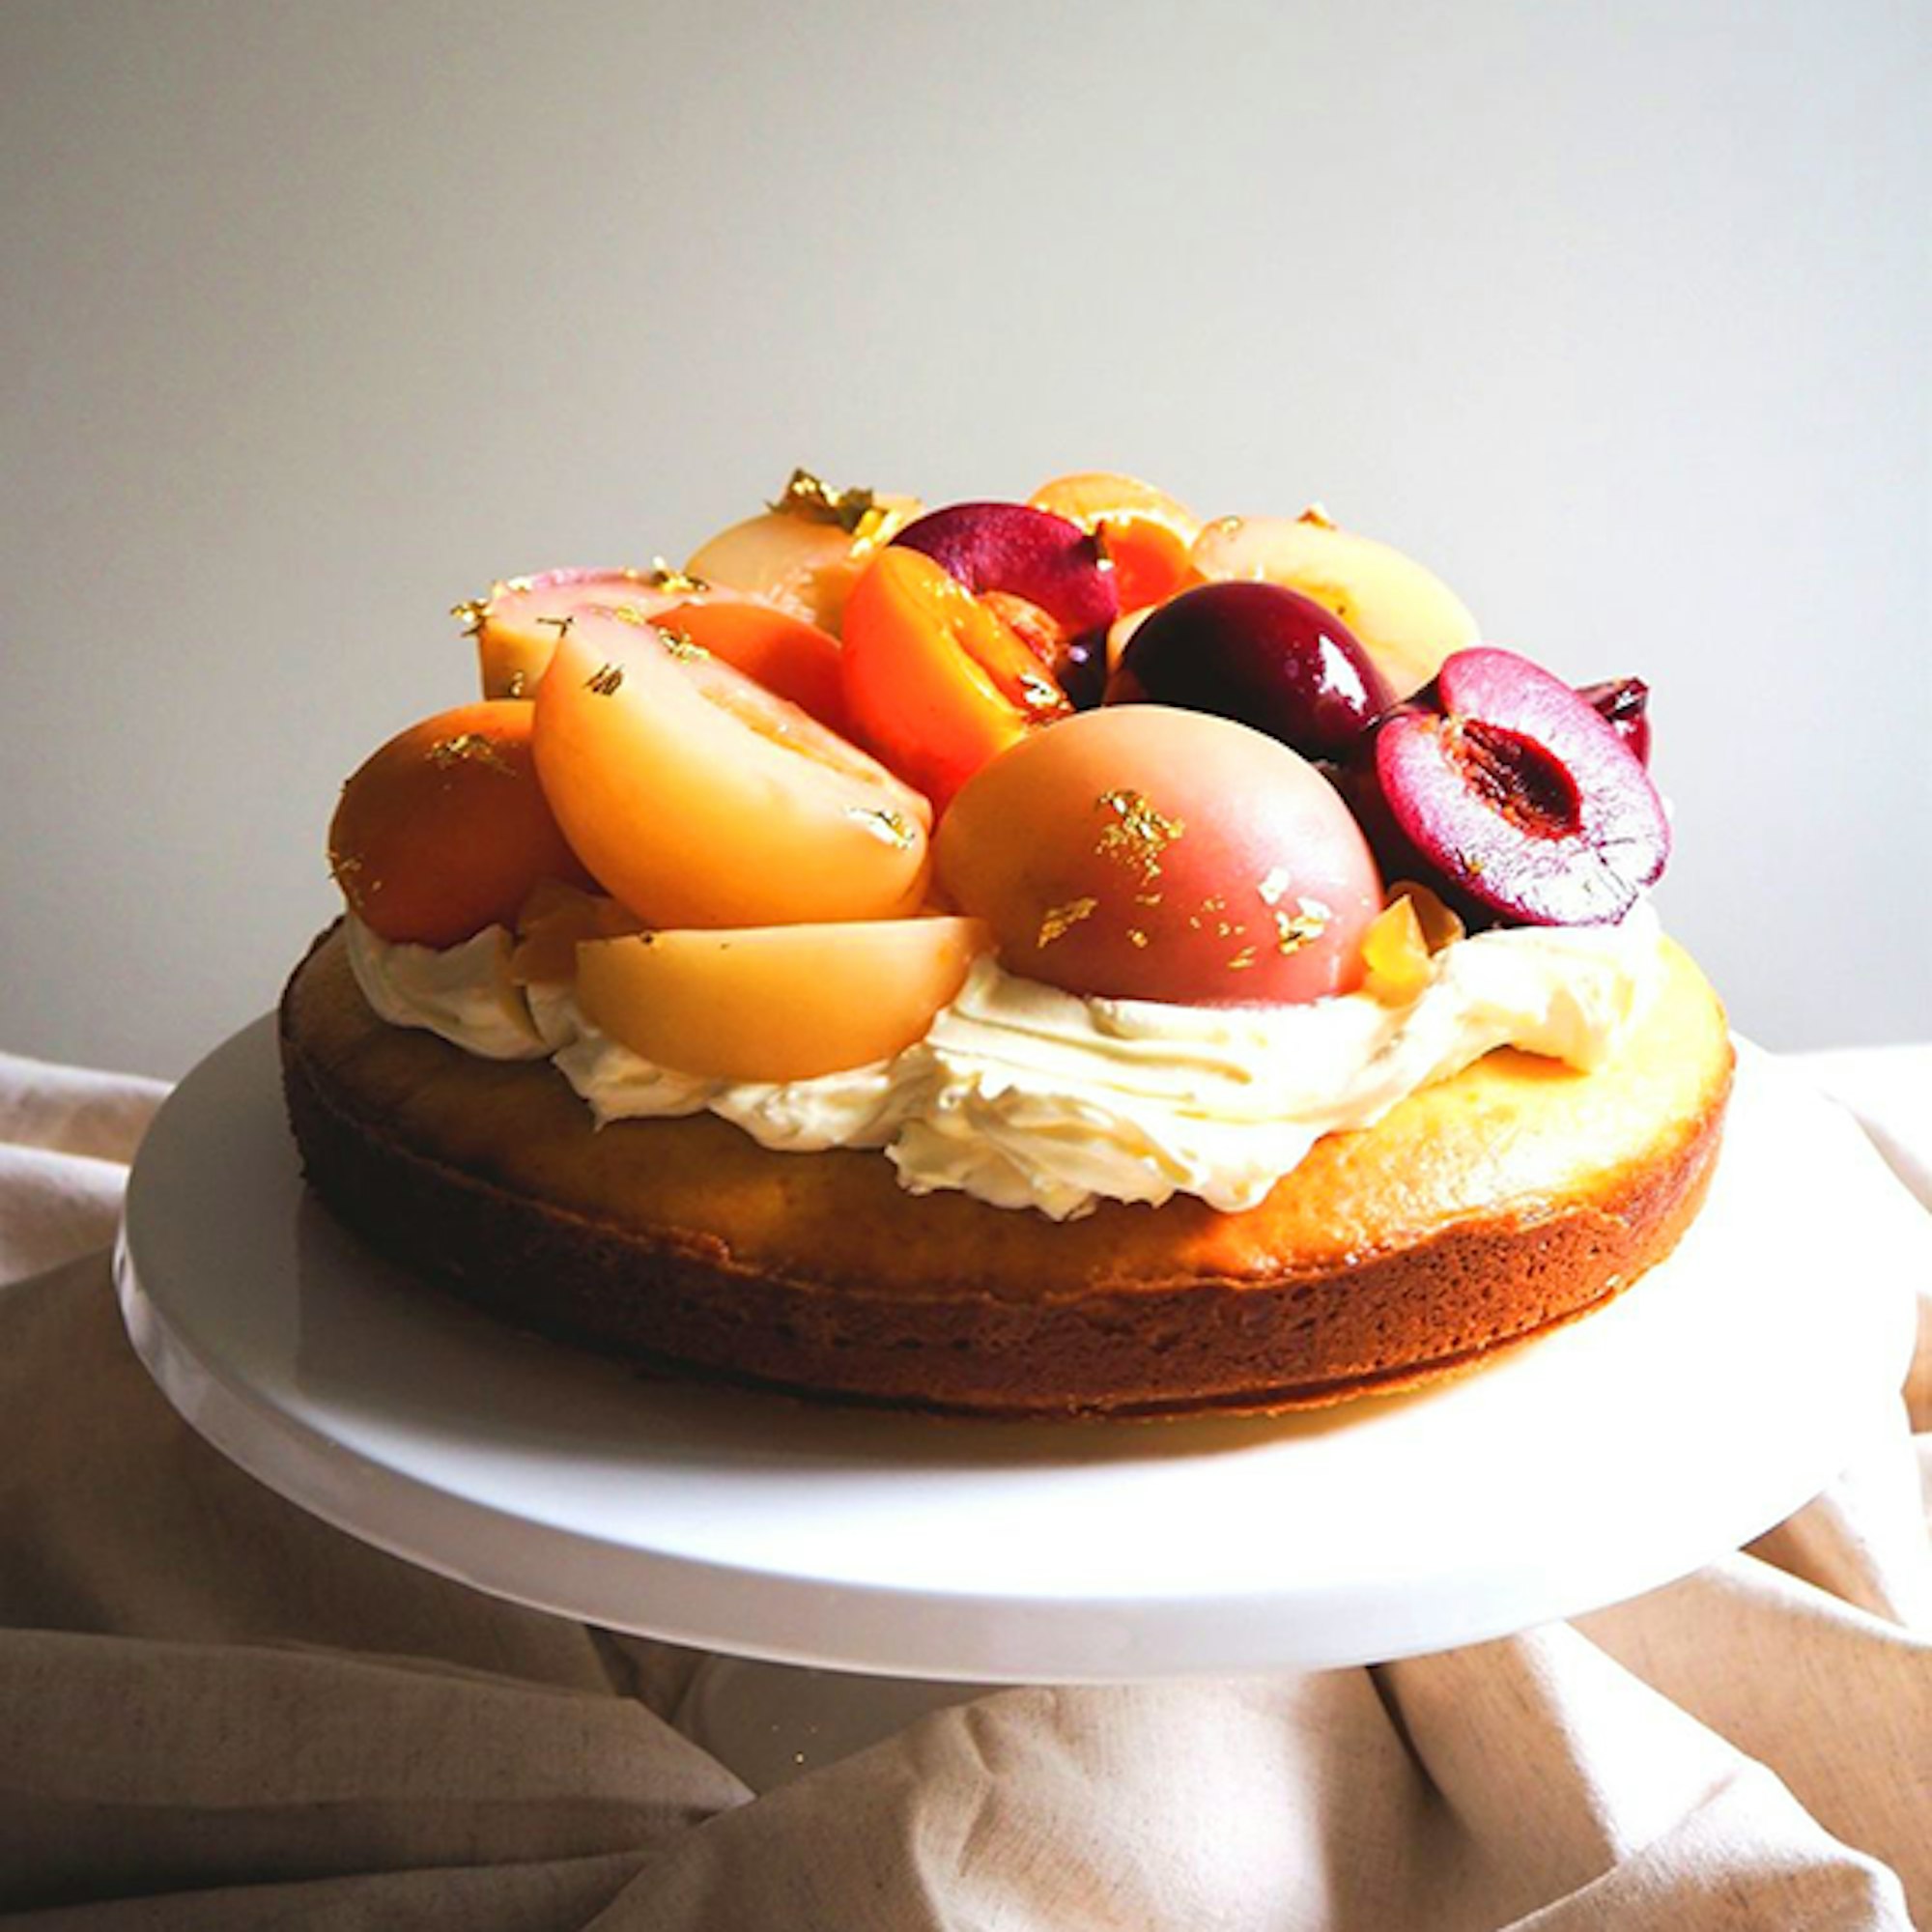 Baked Ricotta Cheesecake with Summer Stone Fruits Recipe